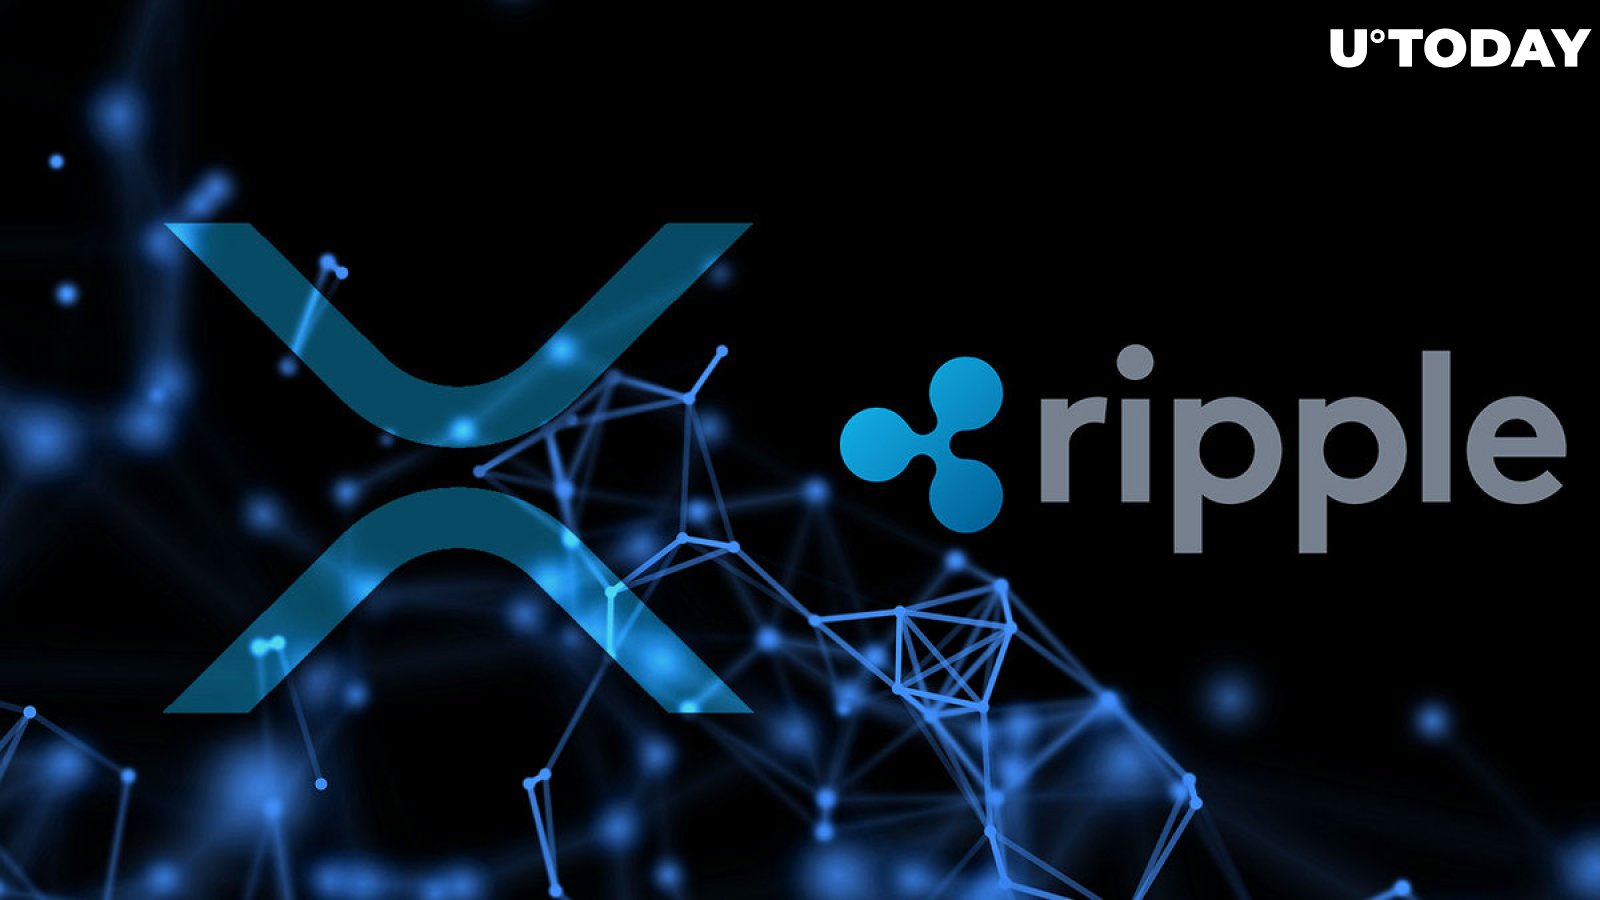 Are XRP & XRPL Centralized? Ripple Executives Argue